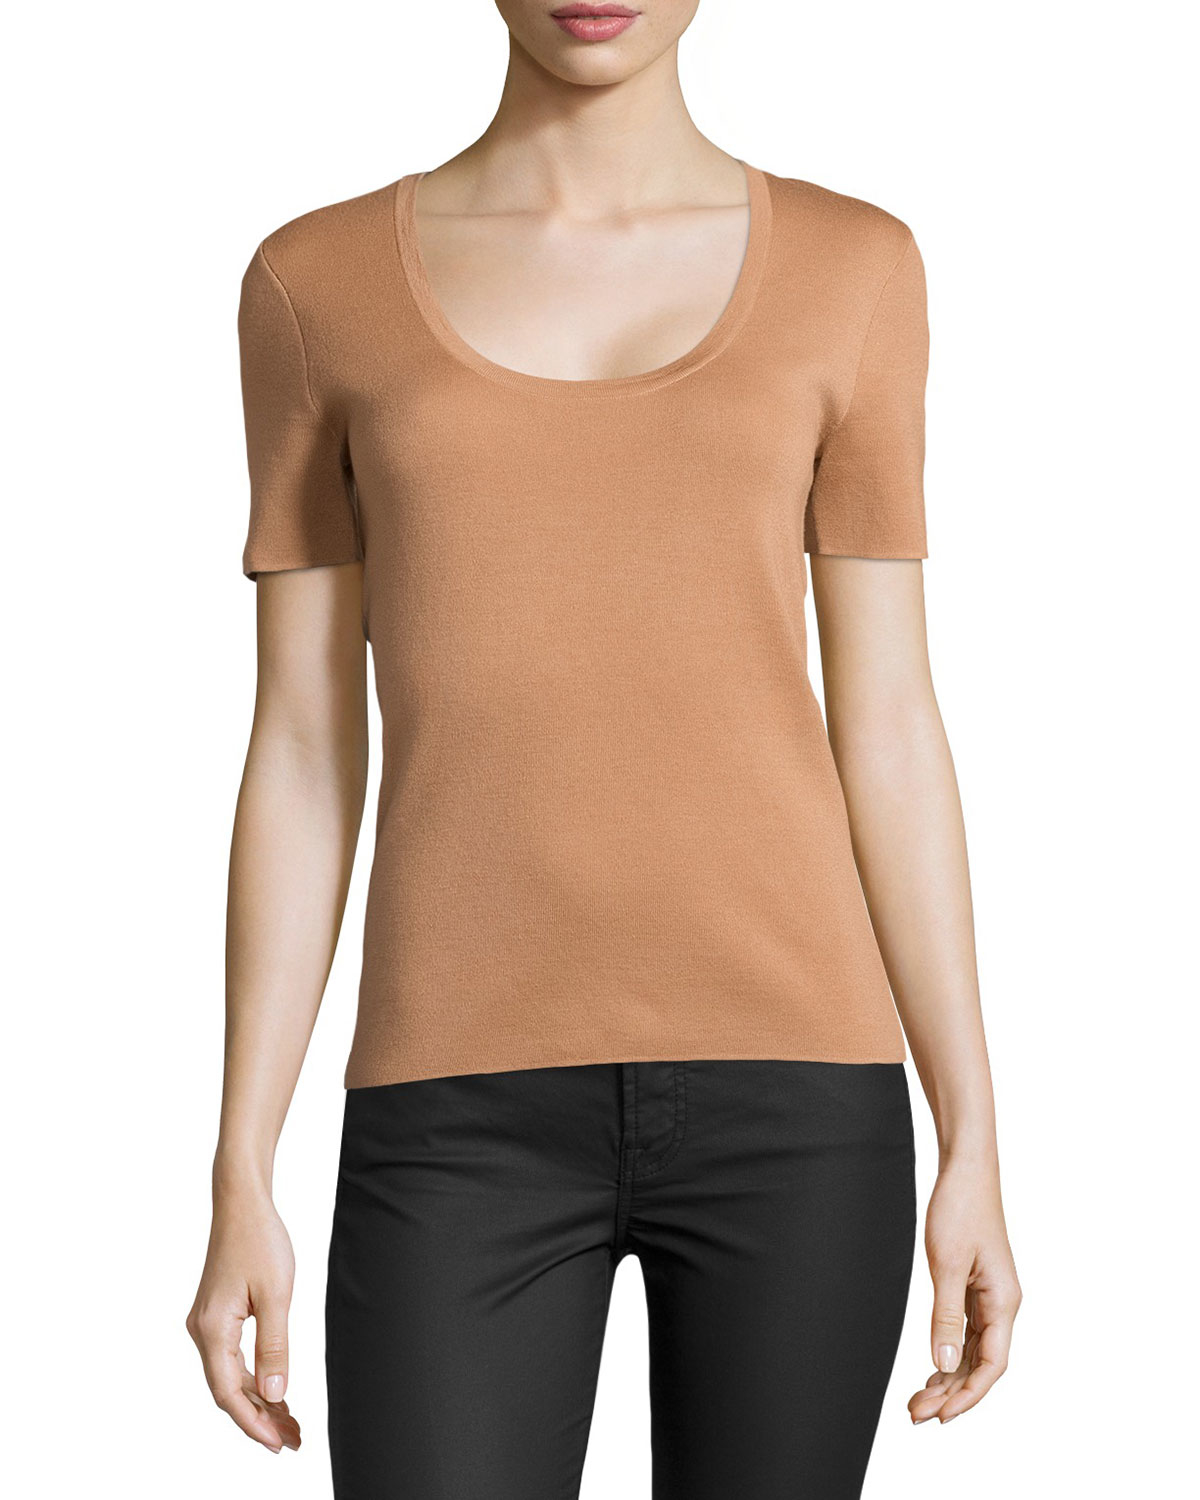 Lyst - Michael Kors Cashmere Short-Sleeve Sweater Top in Brown